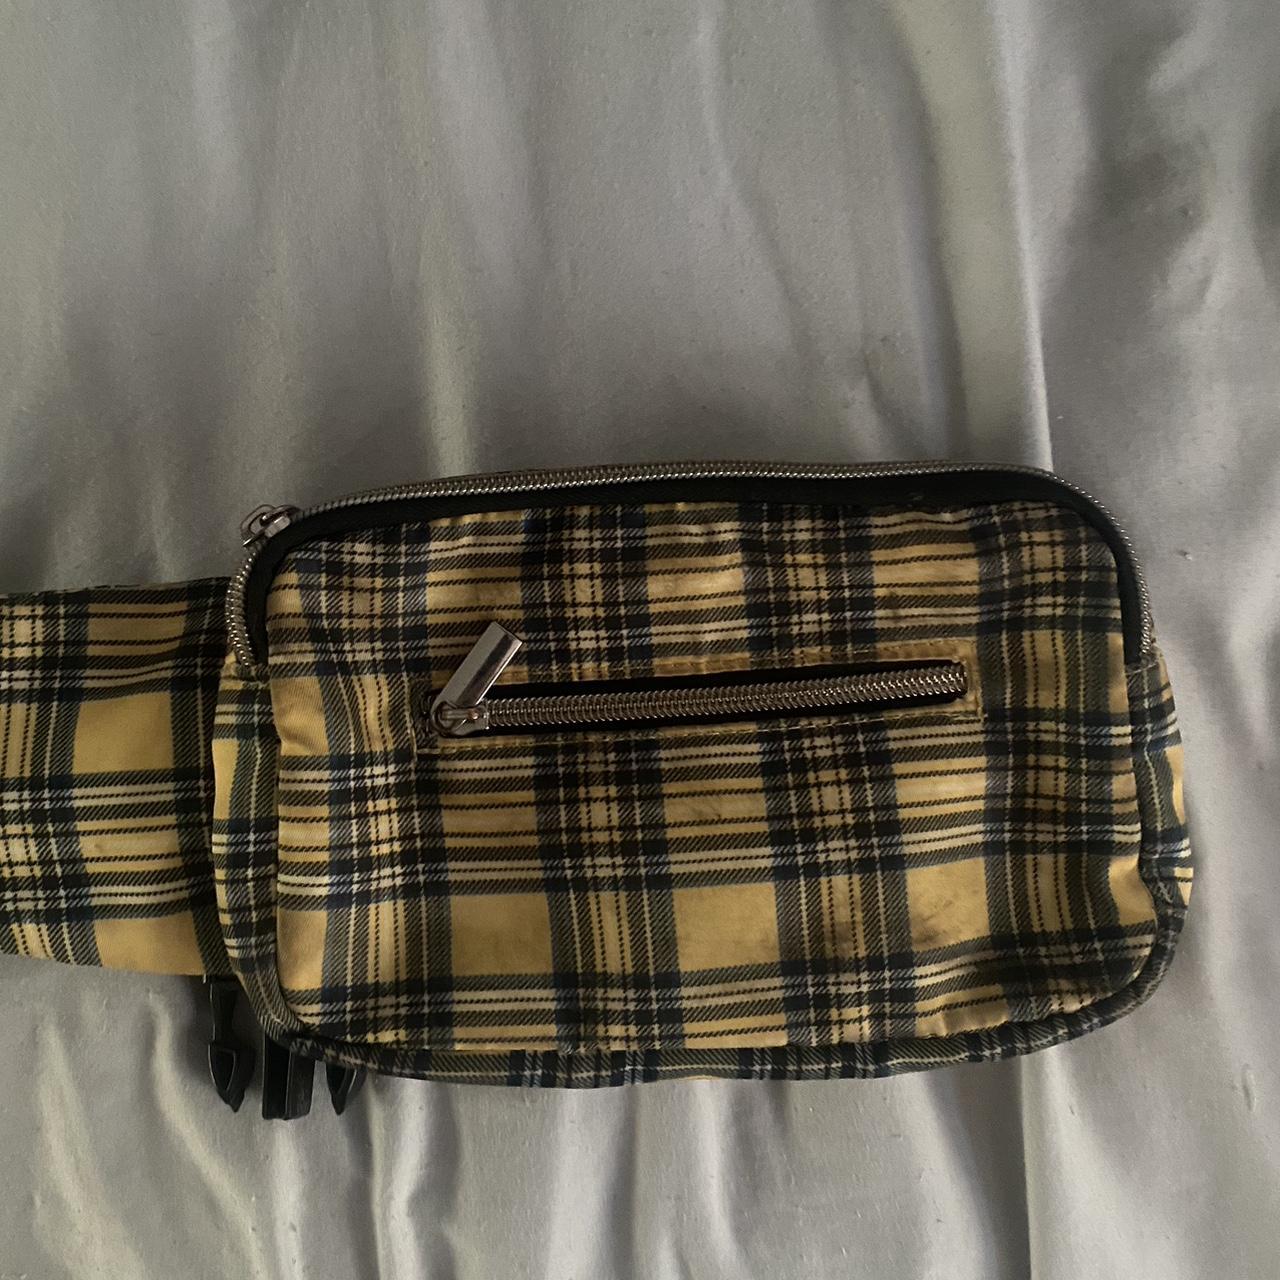 Bags, Brown Checkered Bum Bag Fanny Pack